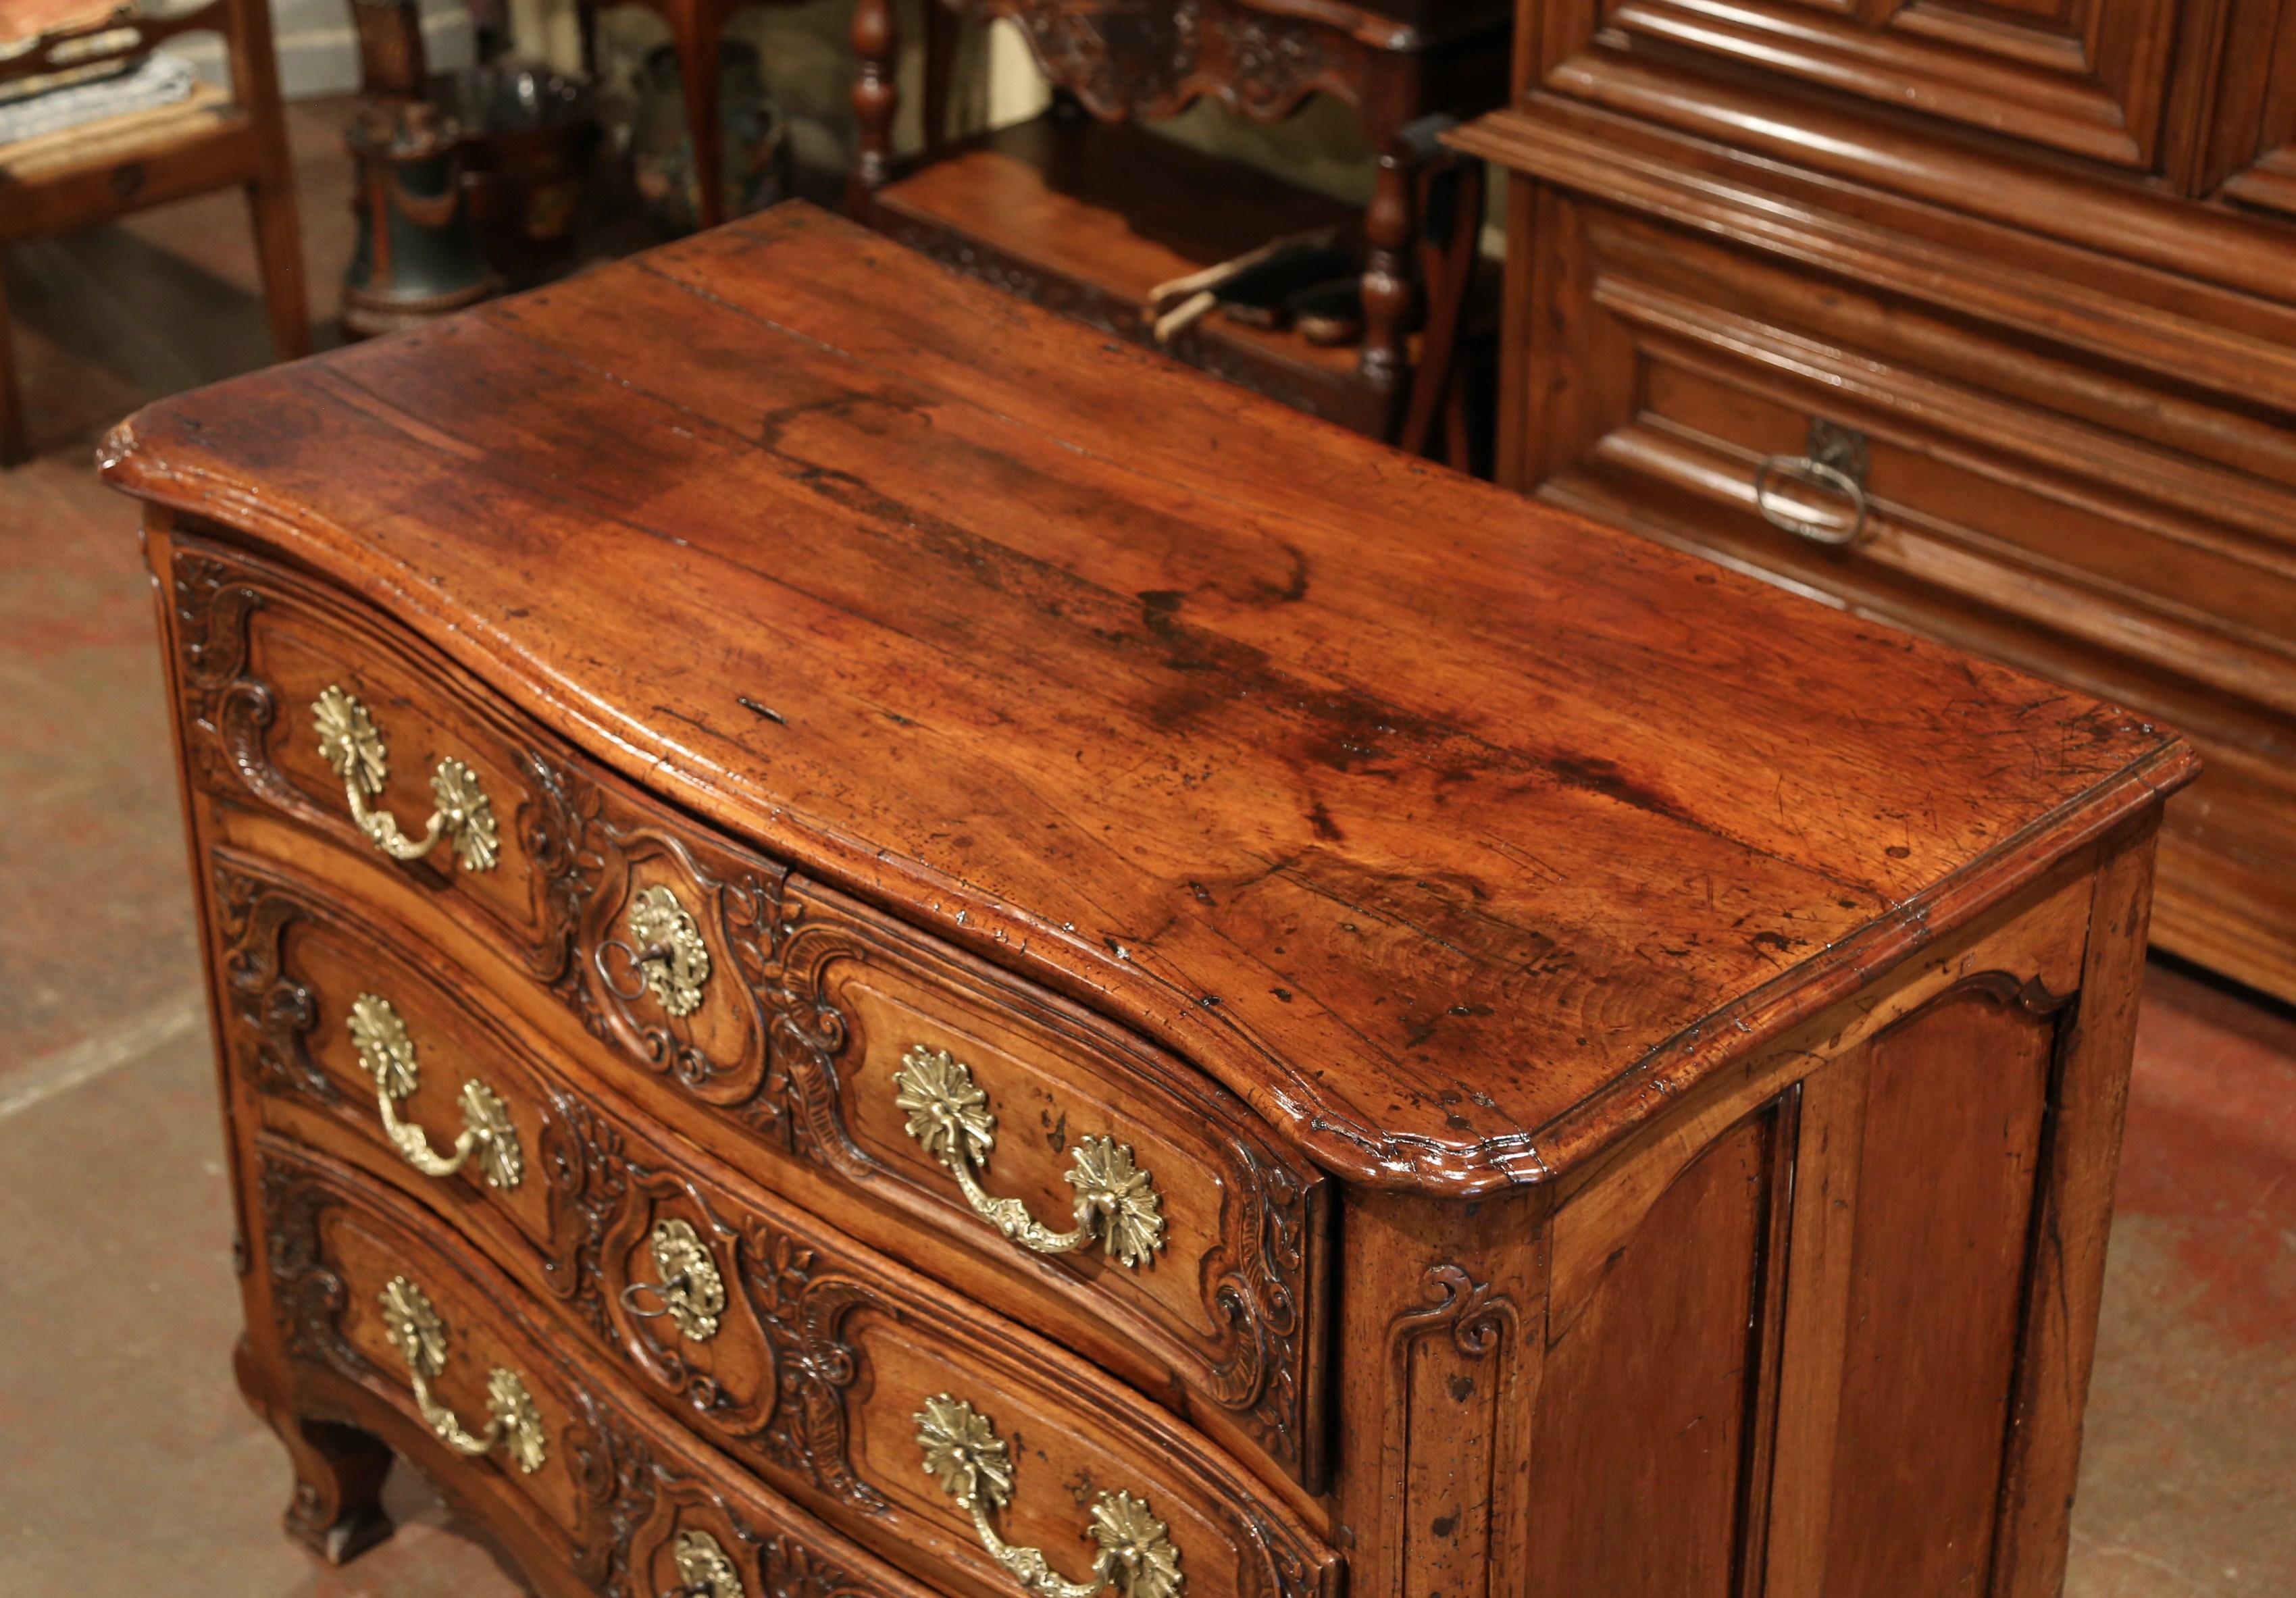 Hand-Carved 18th Century French Louis XV Carved Walnut Bombe Chest of Drawers from Lyon